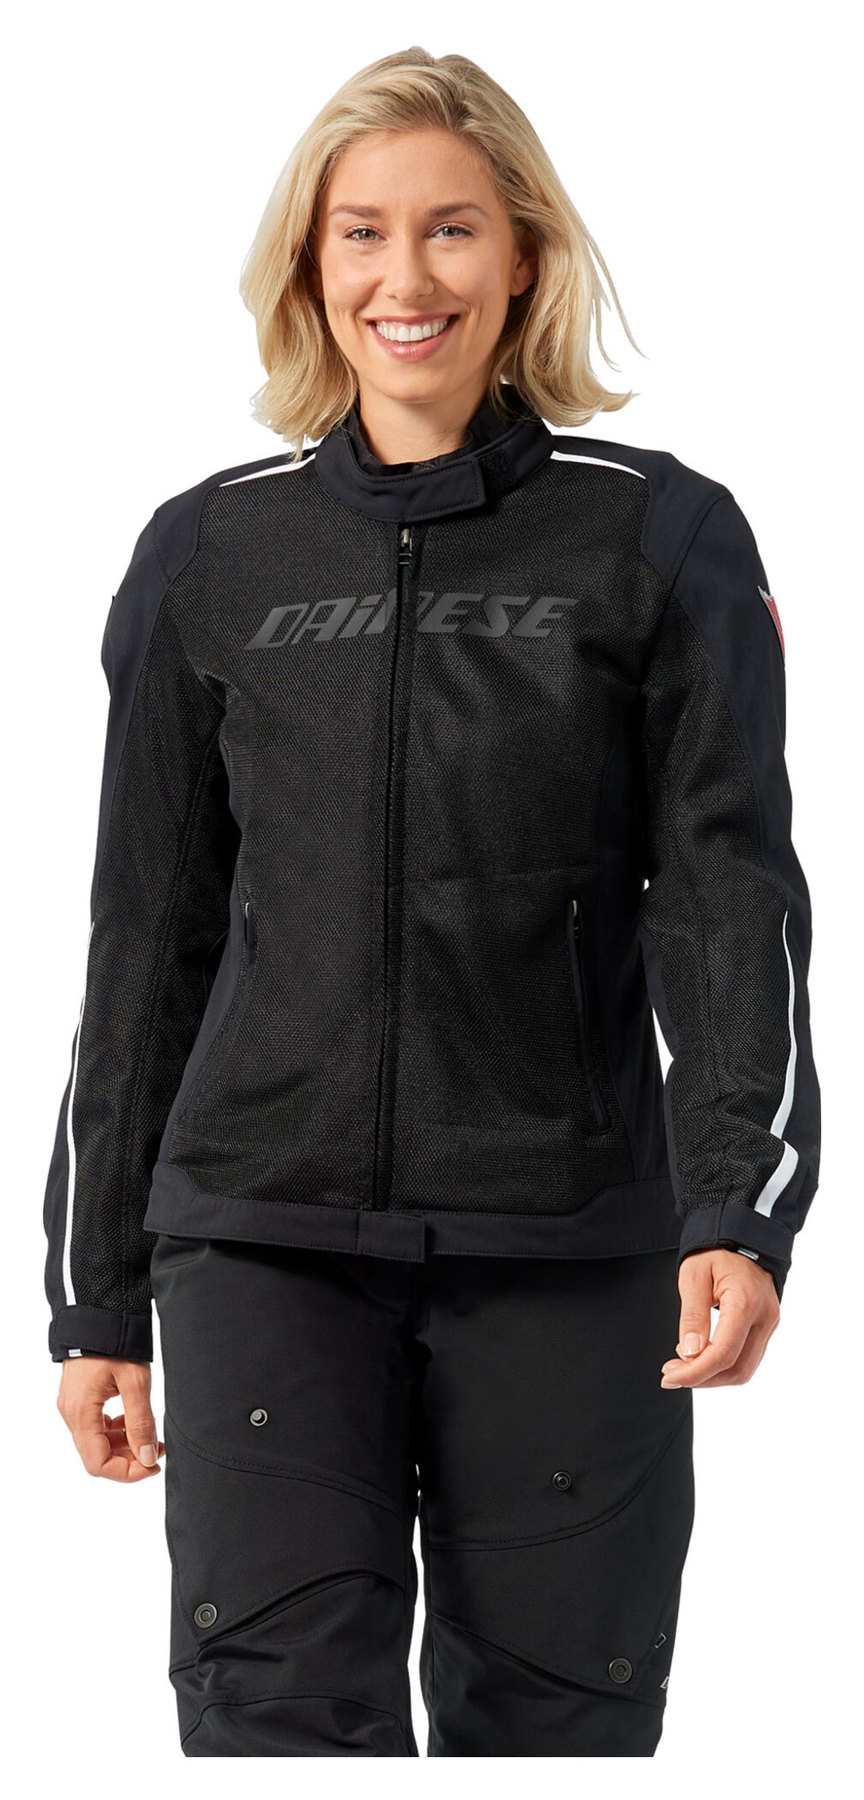 Hydra flux d dry jacket dainese orfox tor browser 4pda